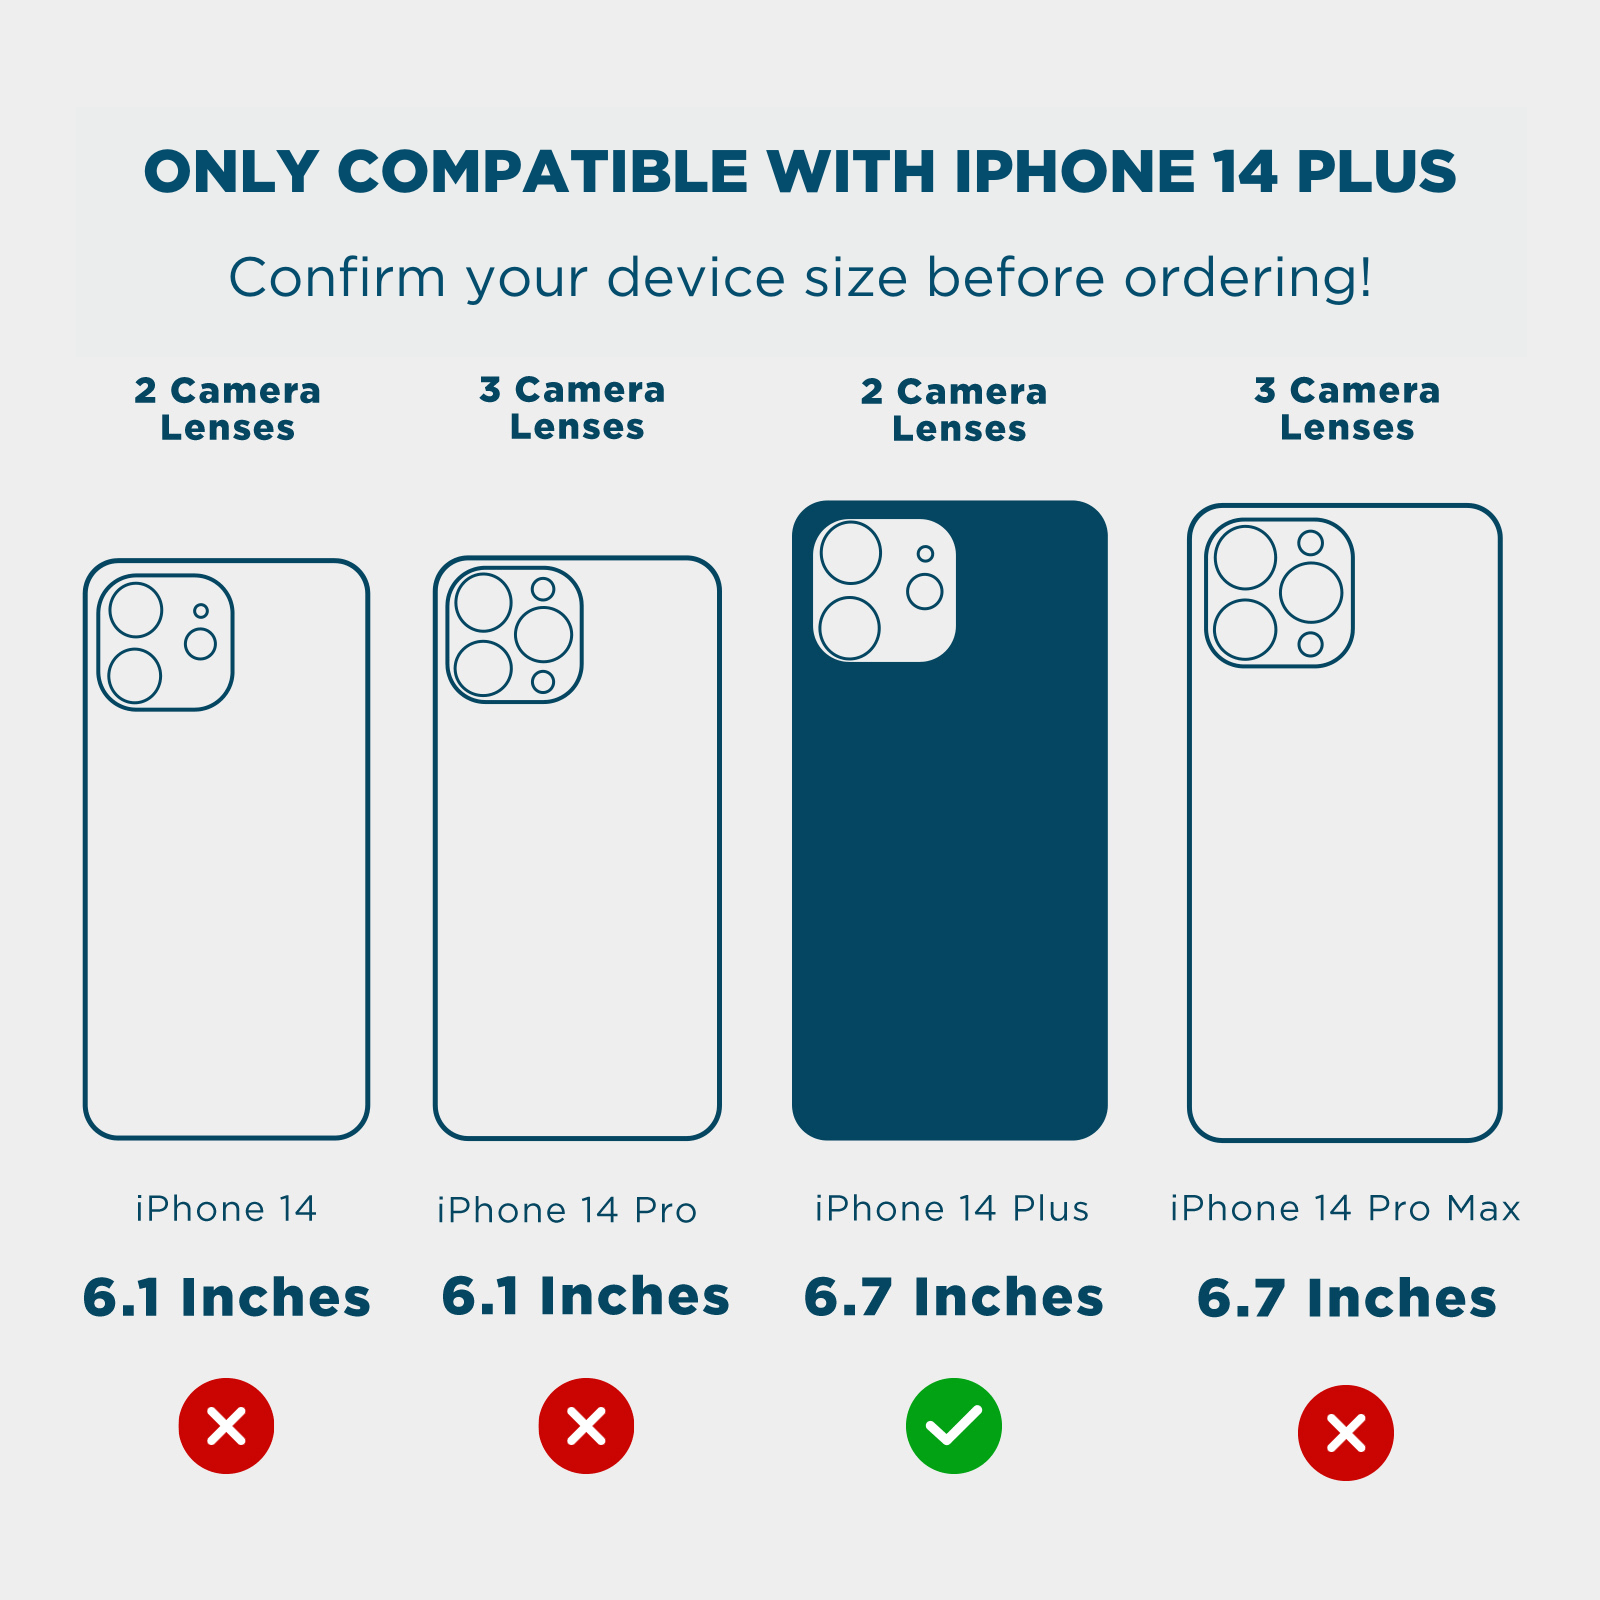 ONLY COMPATIBLE WITH IPHONE 14 PLUS. CONFIRM YOUR DEVICE SIZE BEFORE ORDERING! 2 CAMERA LENSES, 3 CAMERA LENSES, 2 CAMERA LENSES, 3 CAMERA LENSES, 6.1 INCHEC, 6.1 INCHES, 6.7 INCHES, 6.7 INCHES. COLOR::SOAP BUBBLE